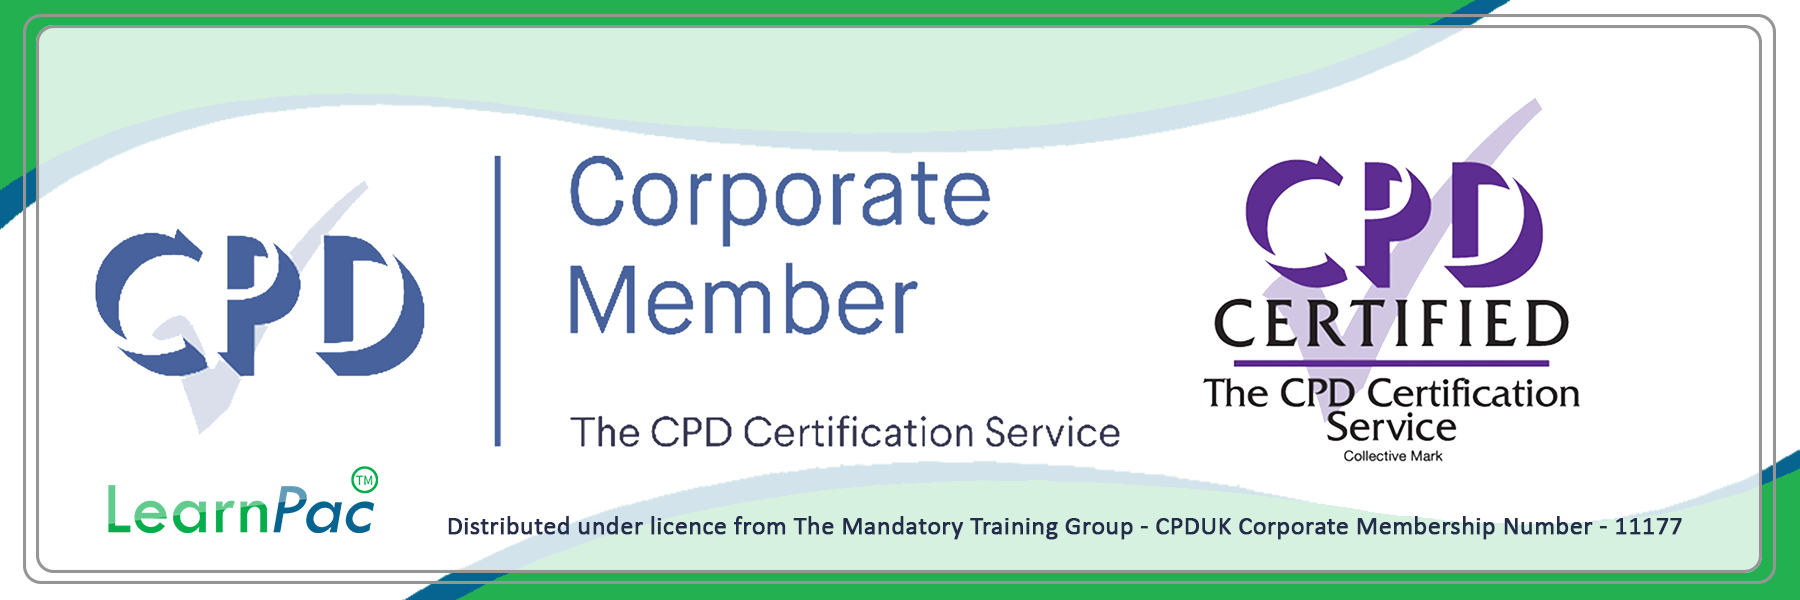 Health and Social Care Training - E-Learning Courses with Certificates - CPD Certified - LearnPac Systems UK -